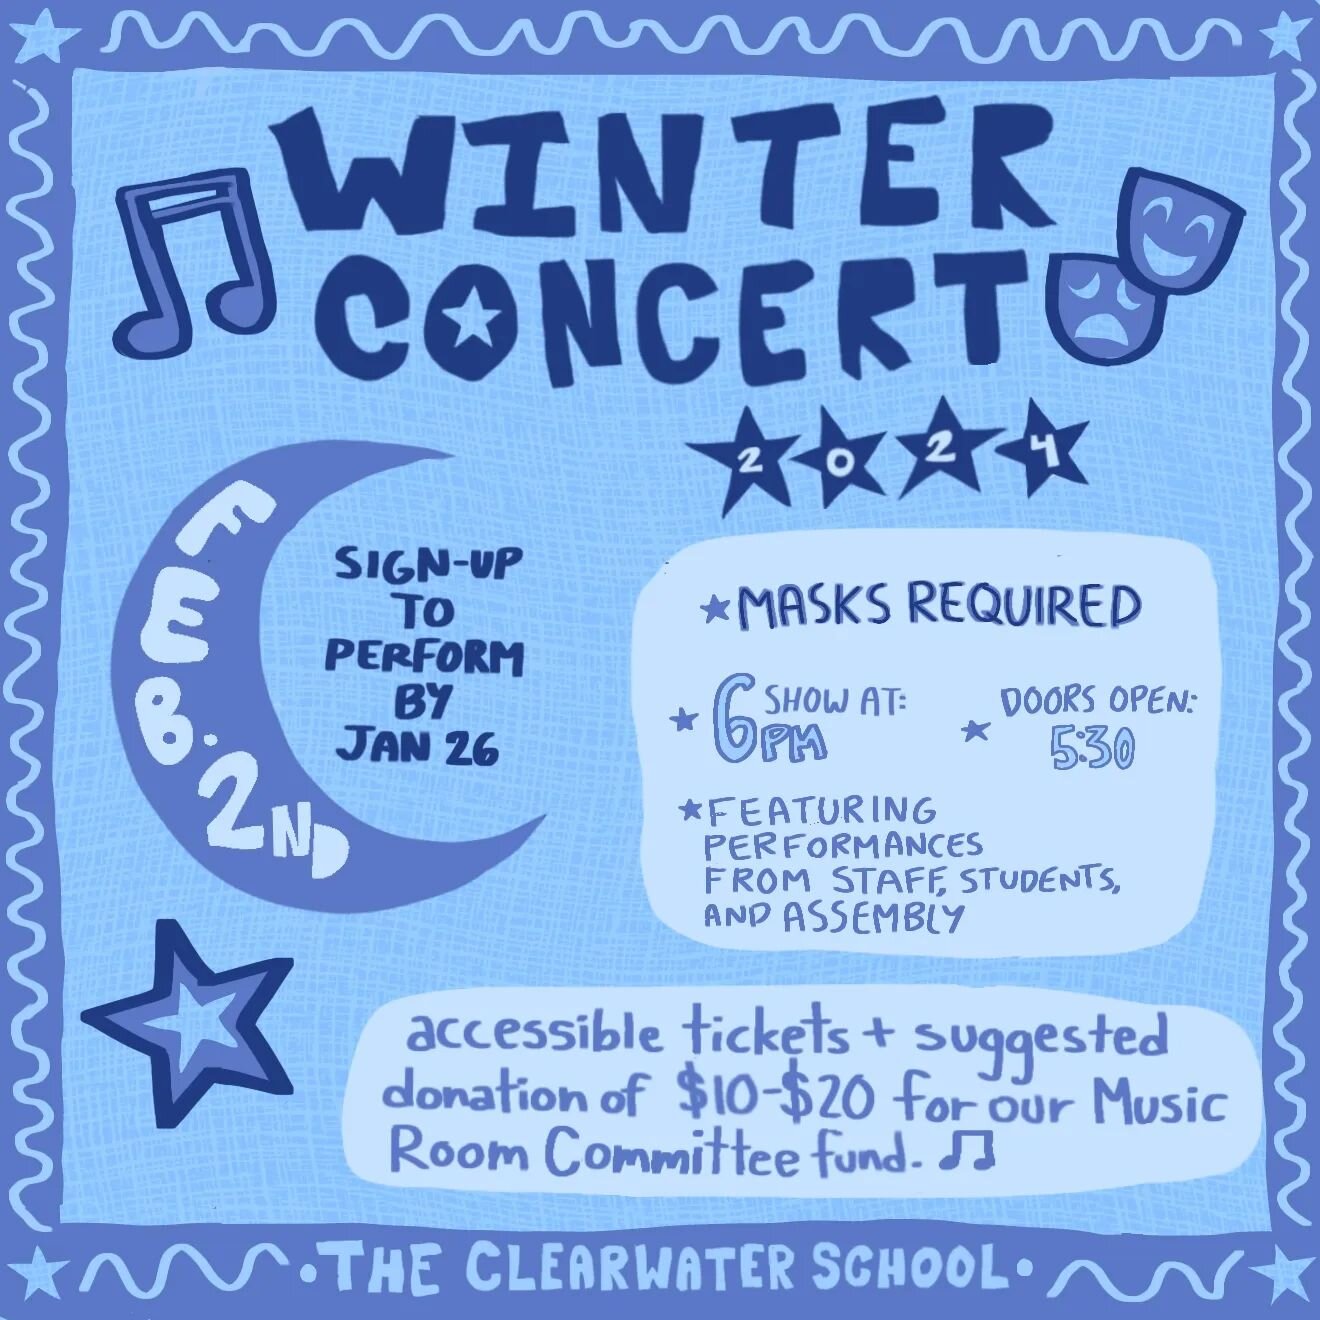 Students have been working hard to put together this year's Winter Concert! Save the date for Friday, February 2nd at 6:00pm in the Common Room. 🌠🎶

MORE DETAILS:
✩Masks required for audience members
✩Tickets are a suggested donation of $10-$20, bu